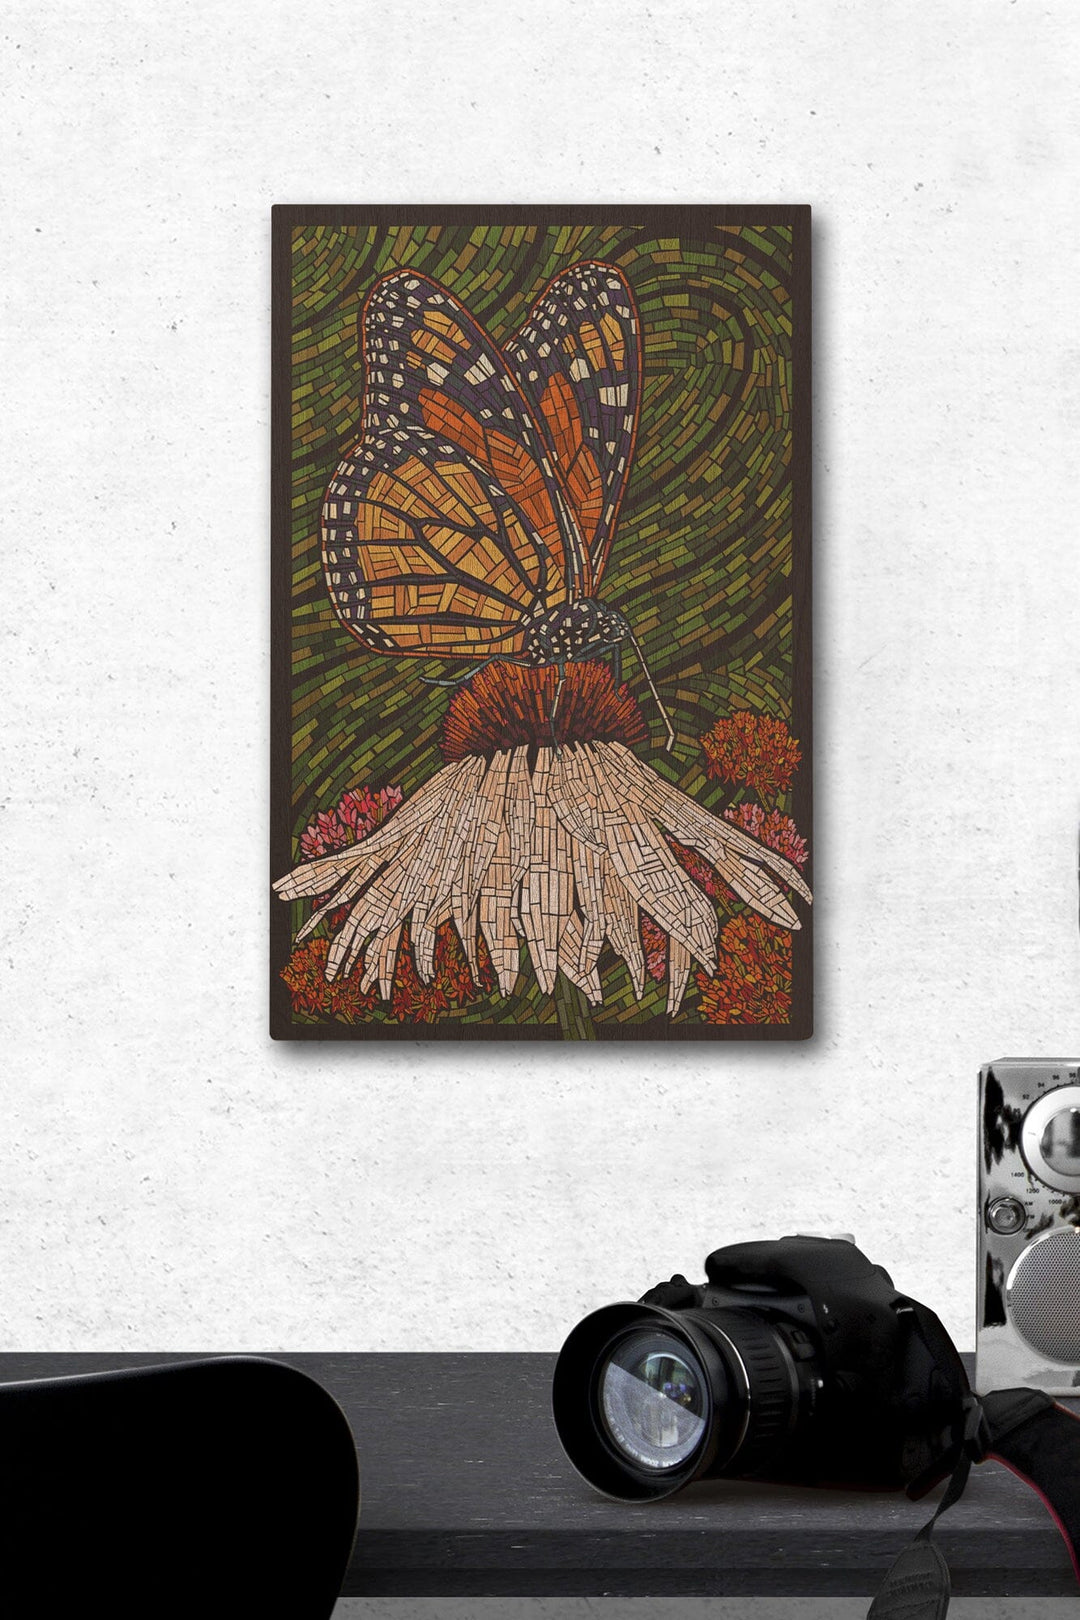 Monarch Butterfly, Paper Mosaic, Green Background, Lantern Press Poster, Wood Signs and Postcards Wood Lantern Press 12 x 18 Wood Gallery Print 